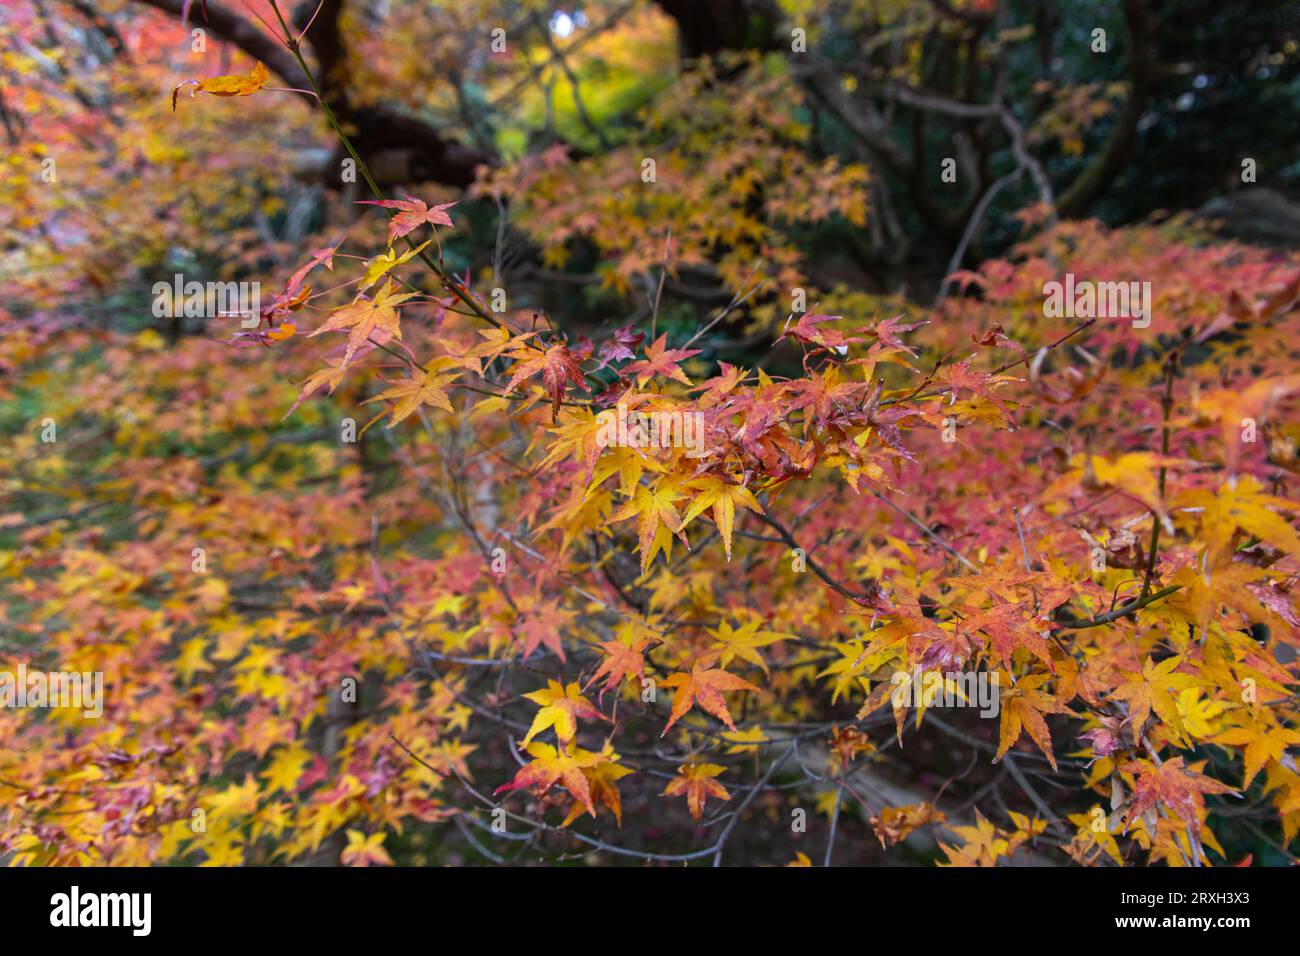 Autumn leaves in the countryside in autumn in Japan. Fall, seasonal, maple and beauty in nature. Red color autumn Wallpaper Image. Stock Photo